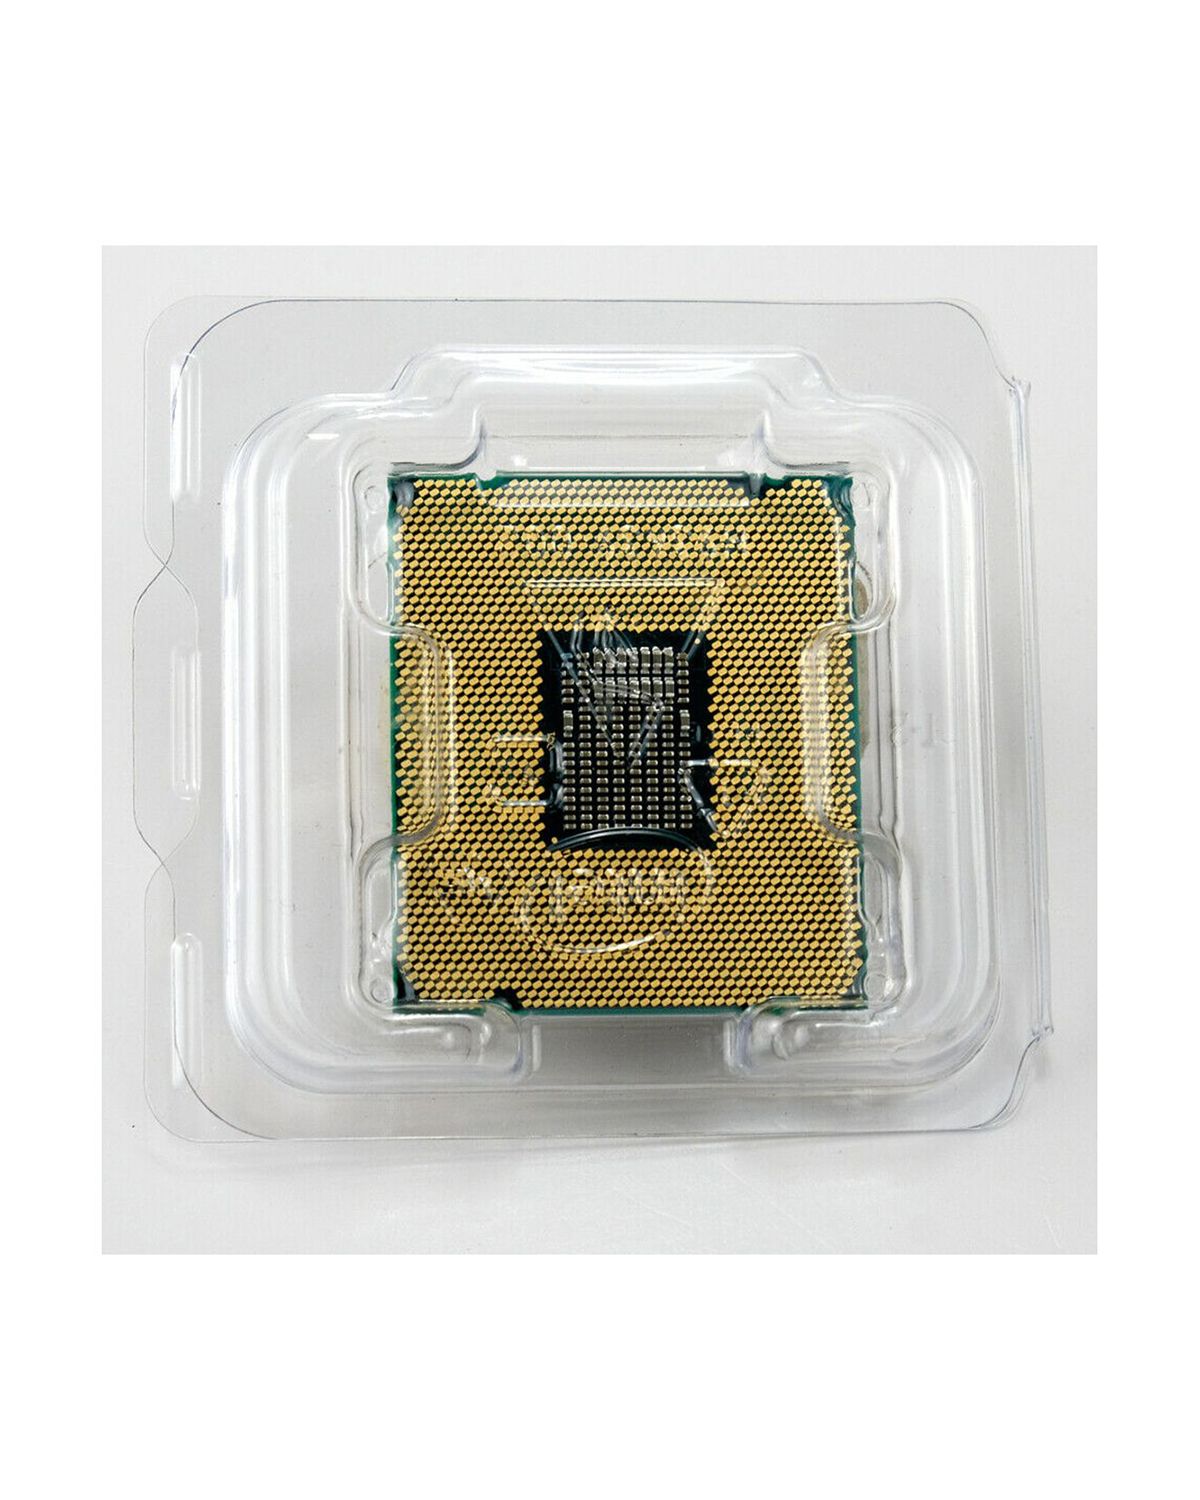 Intel core i9-10980xe extreme edition lga2066, 18 x 3000 €400 №5080311 in  Limassol - Other - sell, buy, ads on bazaraki.com